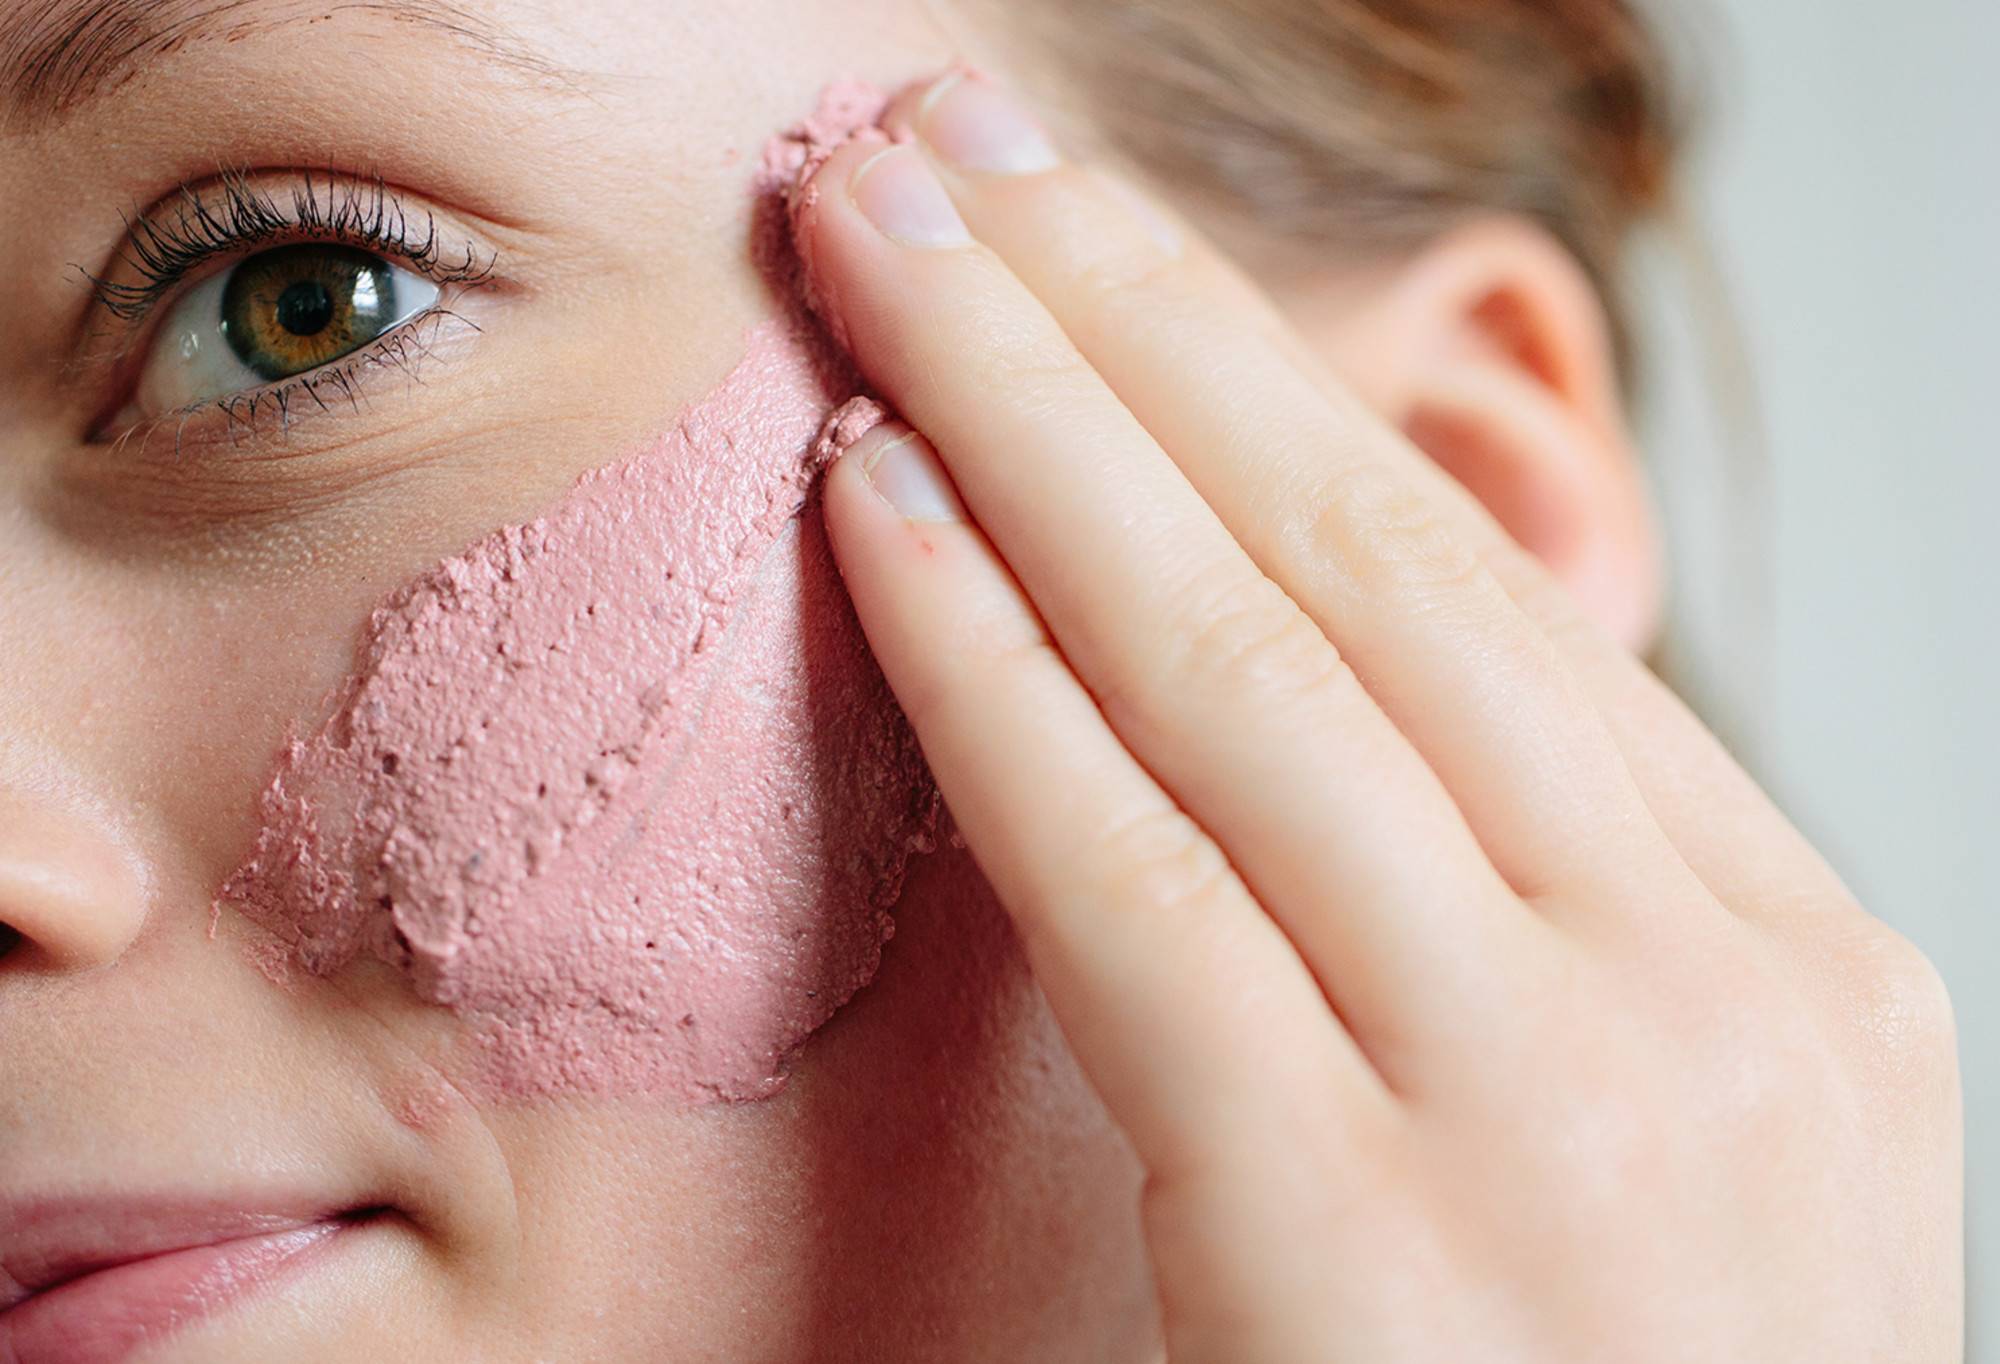 Thick, rosy pink Rosy Cheeks face mask is applied upwards to the cheeks of a softly smiling face.